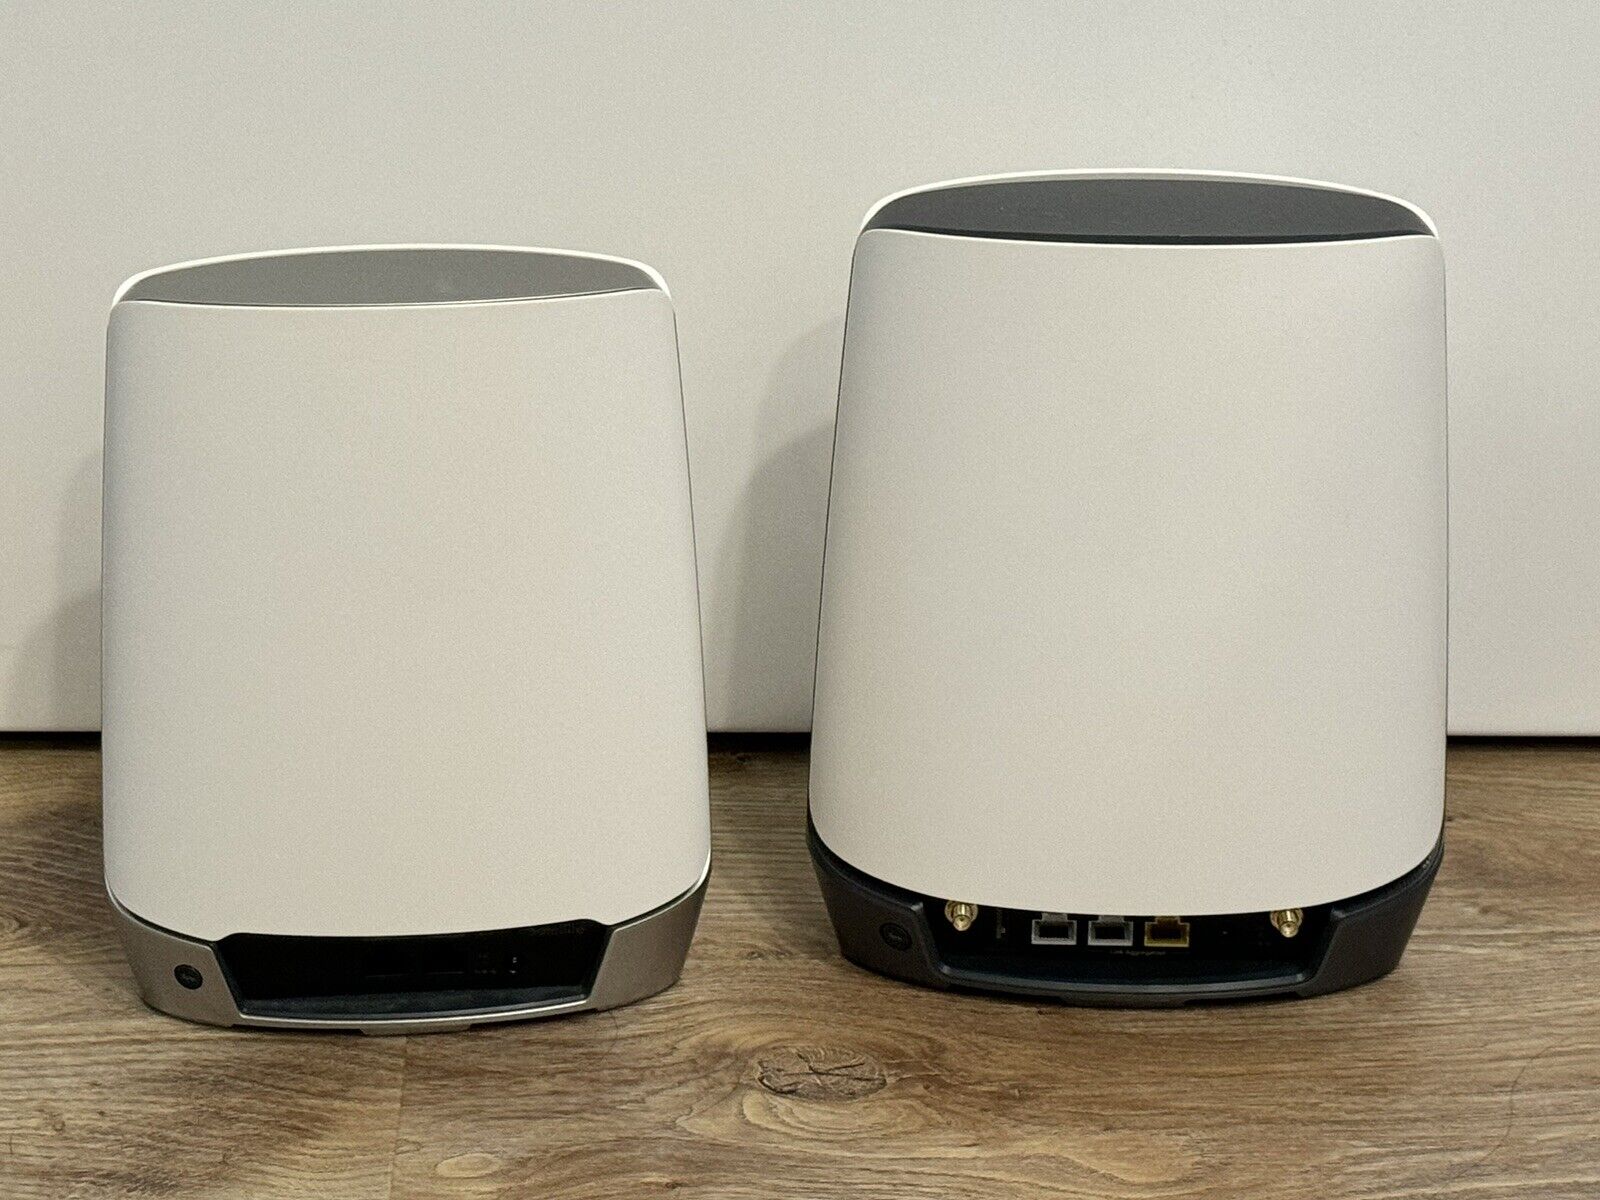 NETGEAR Orbi AX4200 5G Wi-Fi 6 Router (NBR750) and Satellite